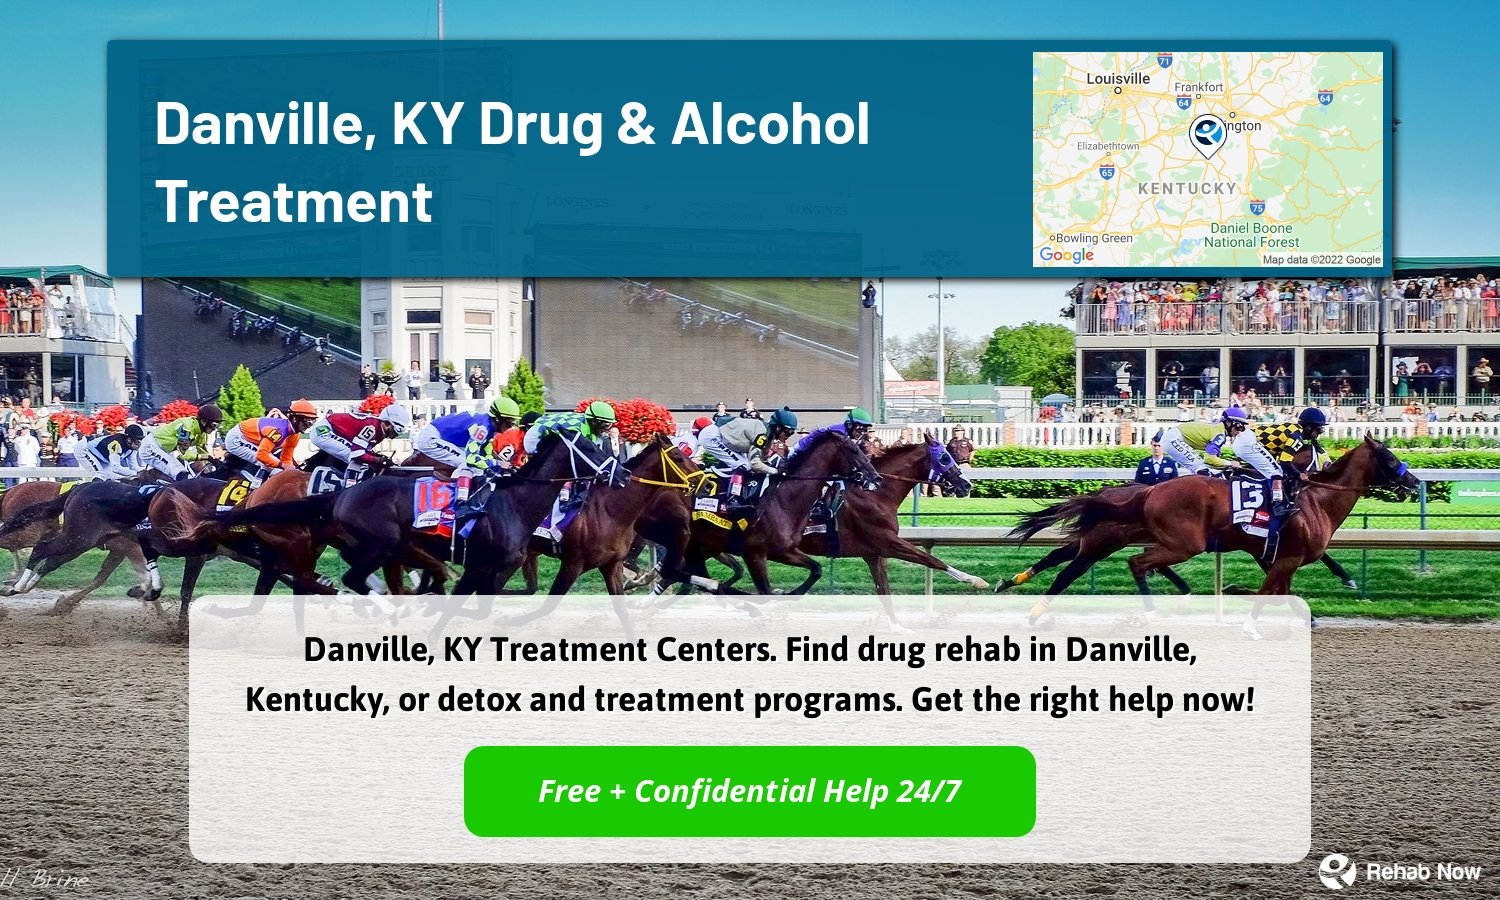 Danville, KY Treatment Centers. Find drug rehab in Danville, Kentucky, or detox and treatment programs. Get the right help now!